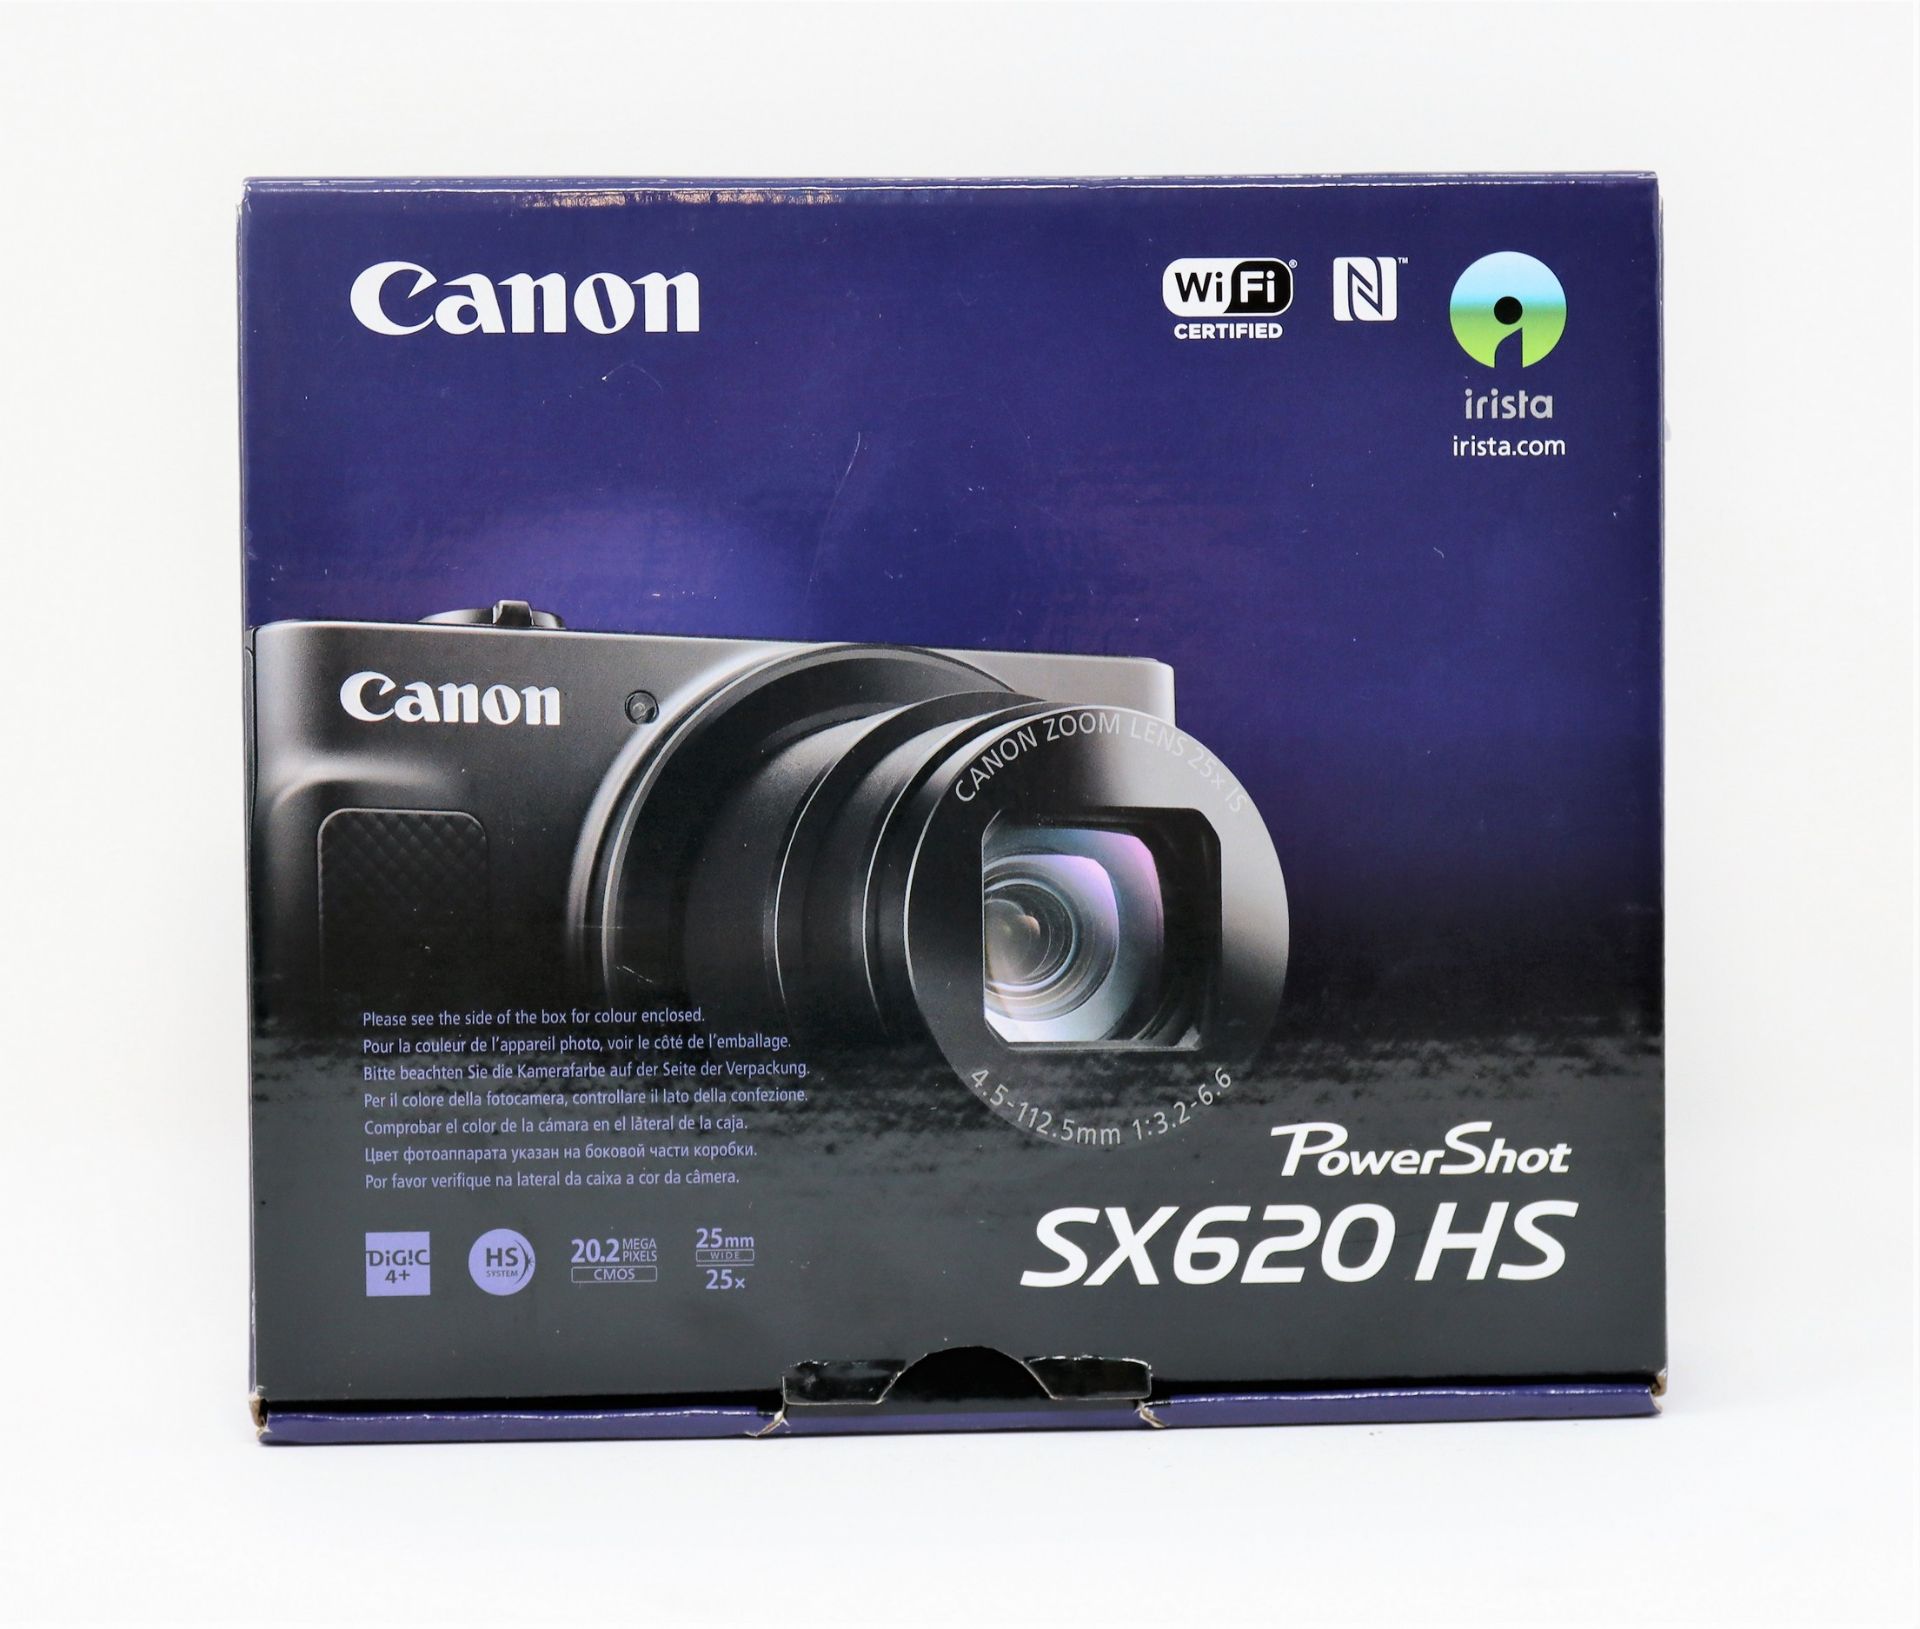 A boxed as new Canon PowerShot SX620 HS Digital Camera in Black (Two pin plug included).